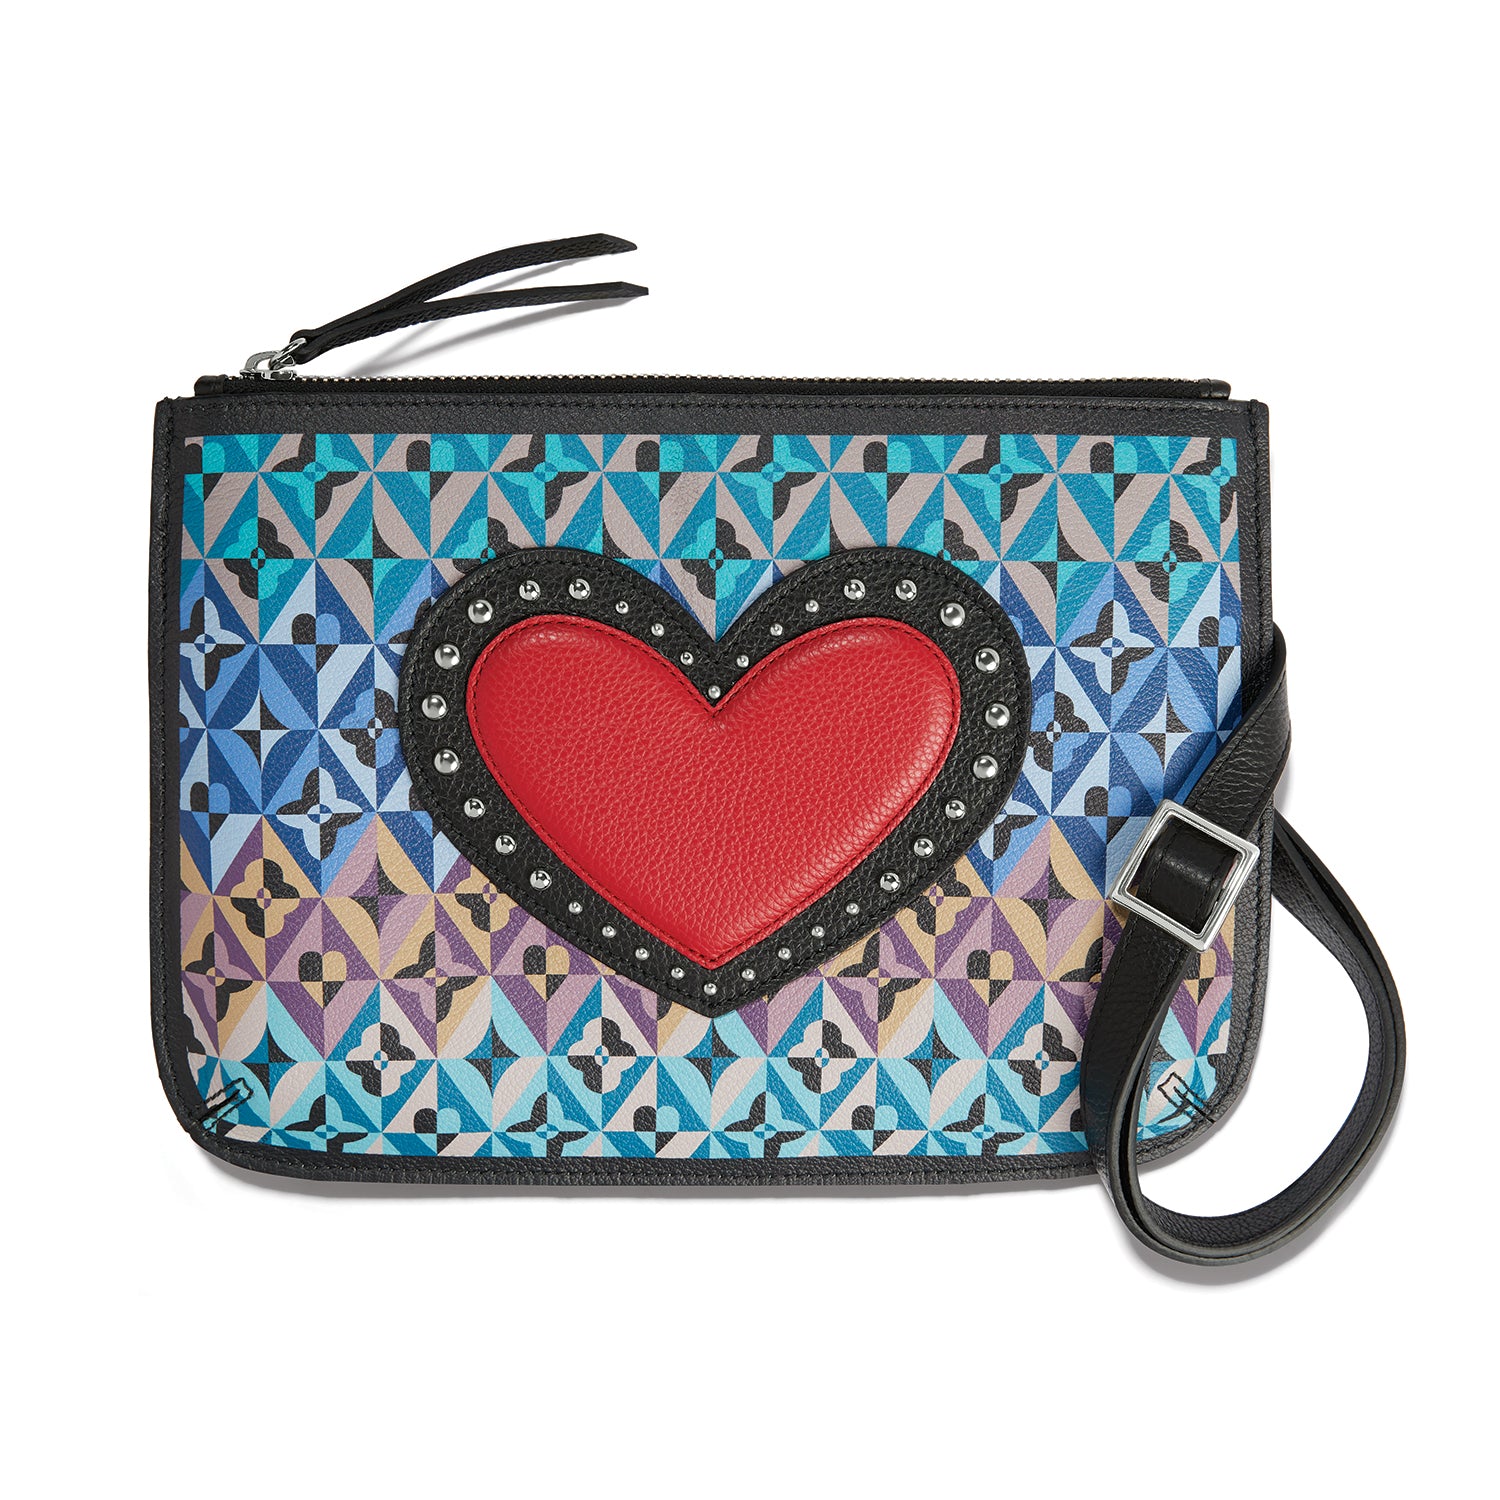 Brighton, Bags, Brighton Black Pebbled Leather Coin Purse With Red Heart